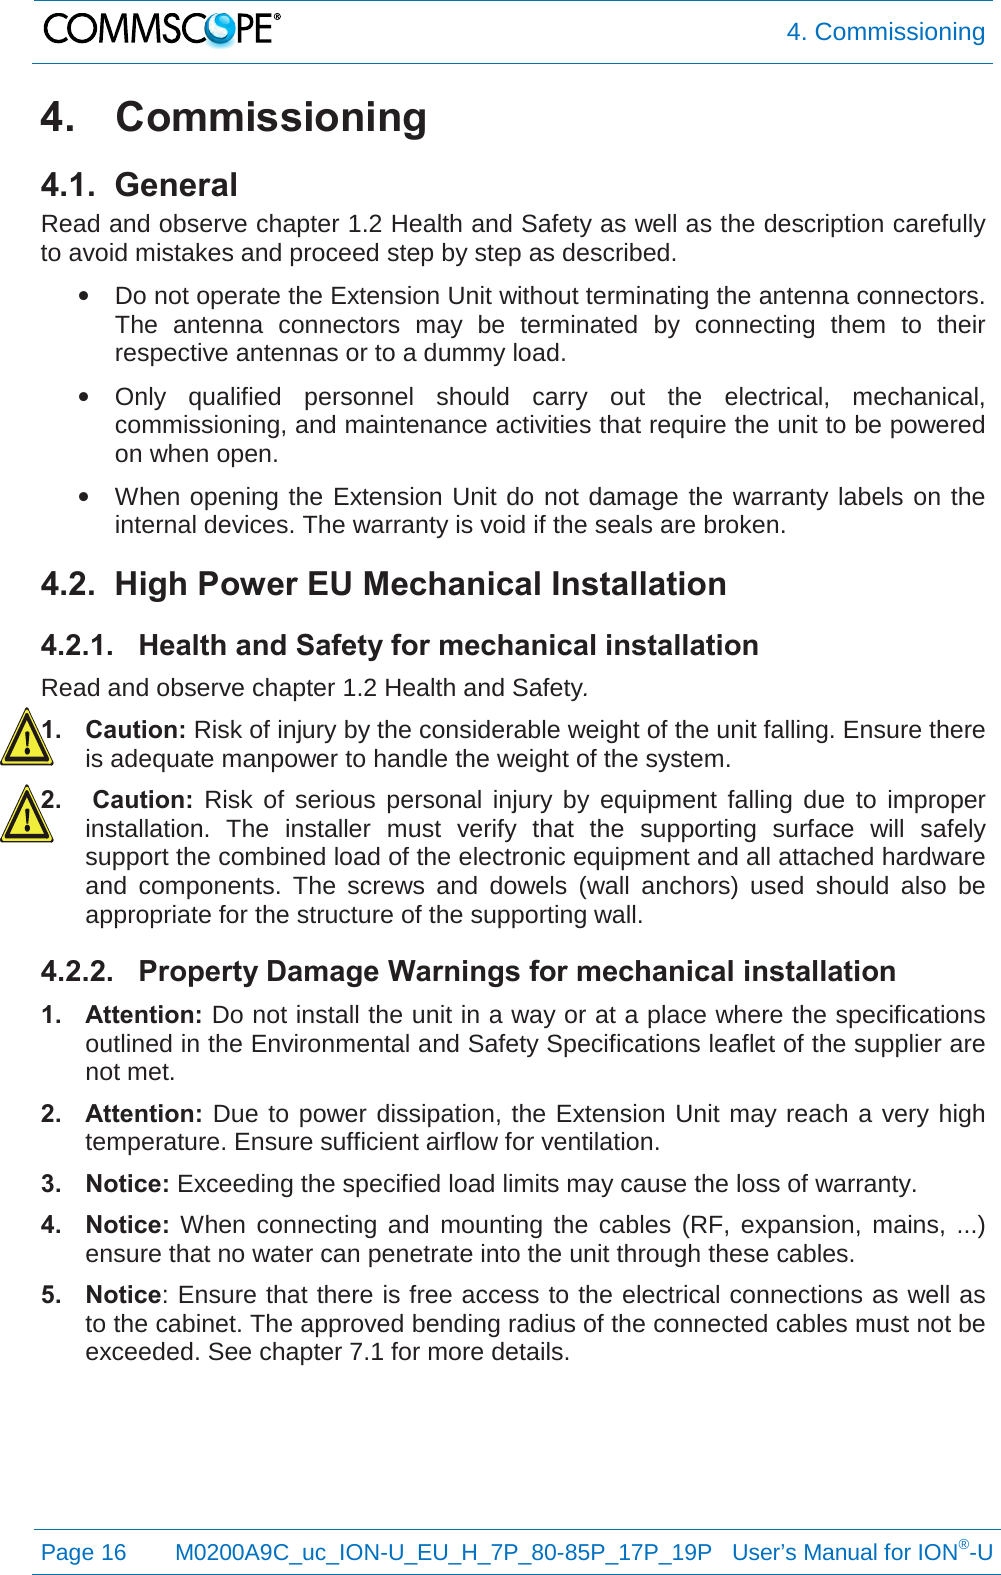  4. Commissioning  Page 16 M0200A9C_uc_ION-U_EU_H_7P_80-85P_17P_19P   User’s Manual for ION®-U  4. Commissioning 4.1.  General Read and observe chapter 1.2 Health and Safety as well as the description carefully to avoid mistakes and proceed step by step as described. • Do not operate the Extension Unit without terminating the antenna connectors. The antenna connectors may be terminated by connecting them to their respective antennas or to a dummy load. • Only qualified personnel should carry out the electrical, mechanical, commissioning, and maintenance activities that require the unit to be powered on when open. • When opening the Extension Unit do not damage the warranty labels on the internal devices. The warranty is void if the seals are broken. 4.2.  High Power EU Mechanical Installation 4.2.1. Health and Safety for mechanical installation Read and observe chapter 1.2 Health and Safety. 1. Caution: Risk of injury by the considerable weight of the unit falling. Ensure there is adequate manpower to handle the weight of the system. 2.  Caution:  Risk of serious personal injury by equipment falling due to improper installation. The installer must verify that the supporting surface will safely support the combined load of the electronic equipment and all attached hardware and components. The screws and dowels (wall anchors) used should also be appropriate for the structure of the supporting wall. 4.2.2. Property Damage Warnings for mechanical installation 1. Attention: Do not install the unit in a way or at a place where the specifications outlined in the Environmental and Safety Specifications leaflet of the supplier are not met. 2. Attention:  Due to power dissipation, the Extension Unit may reach a very high temperature. Ensure sufficient airflow for ventilation. 3. Notice: Exceeding the specified load limits may cause the loss of warranty. 4. Notice:  When connecting and mounting the cables (RF, expansion, mains, ...) ensure that no water can penetrate into the unit through these cables. 5. Notice: Ensure that there is free access to the electrical connections as well as to the cabinet. The approved bending radius of the connected cables must not be exceeded. See chapter 7.1 for more details.    